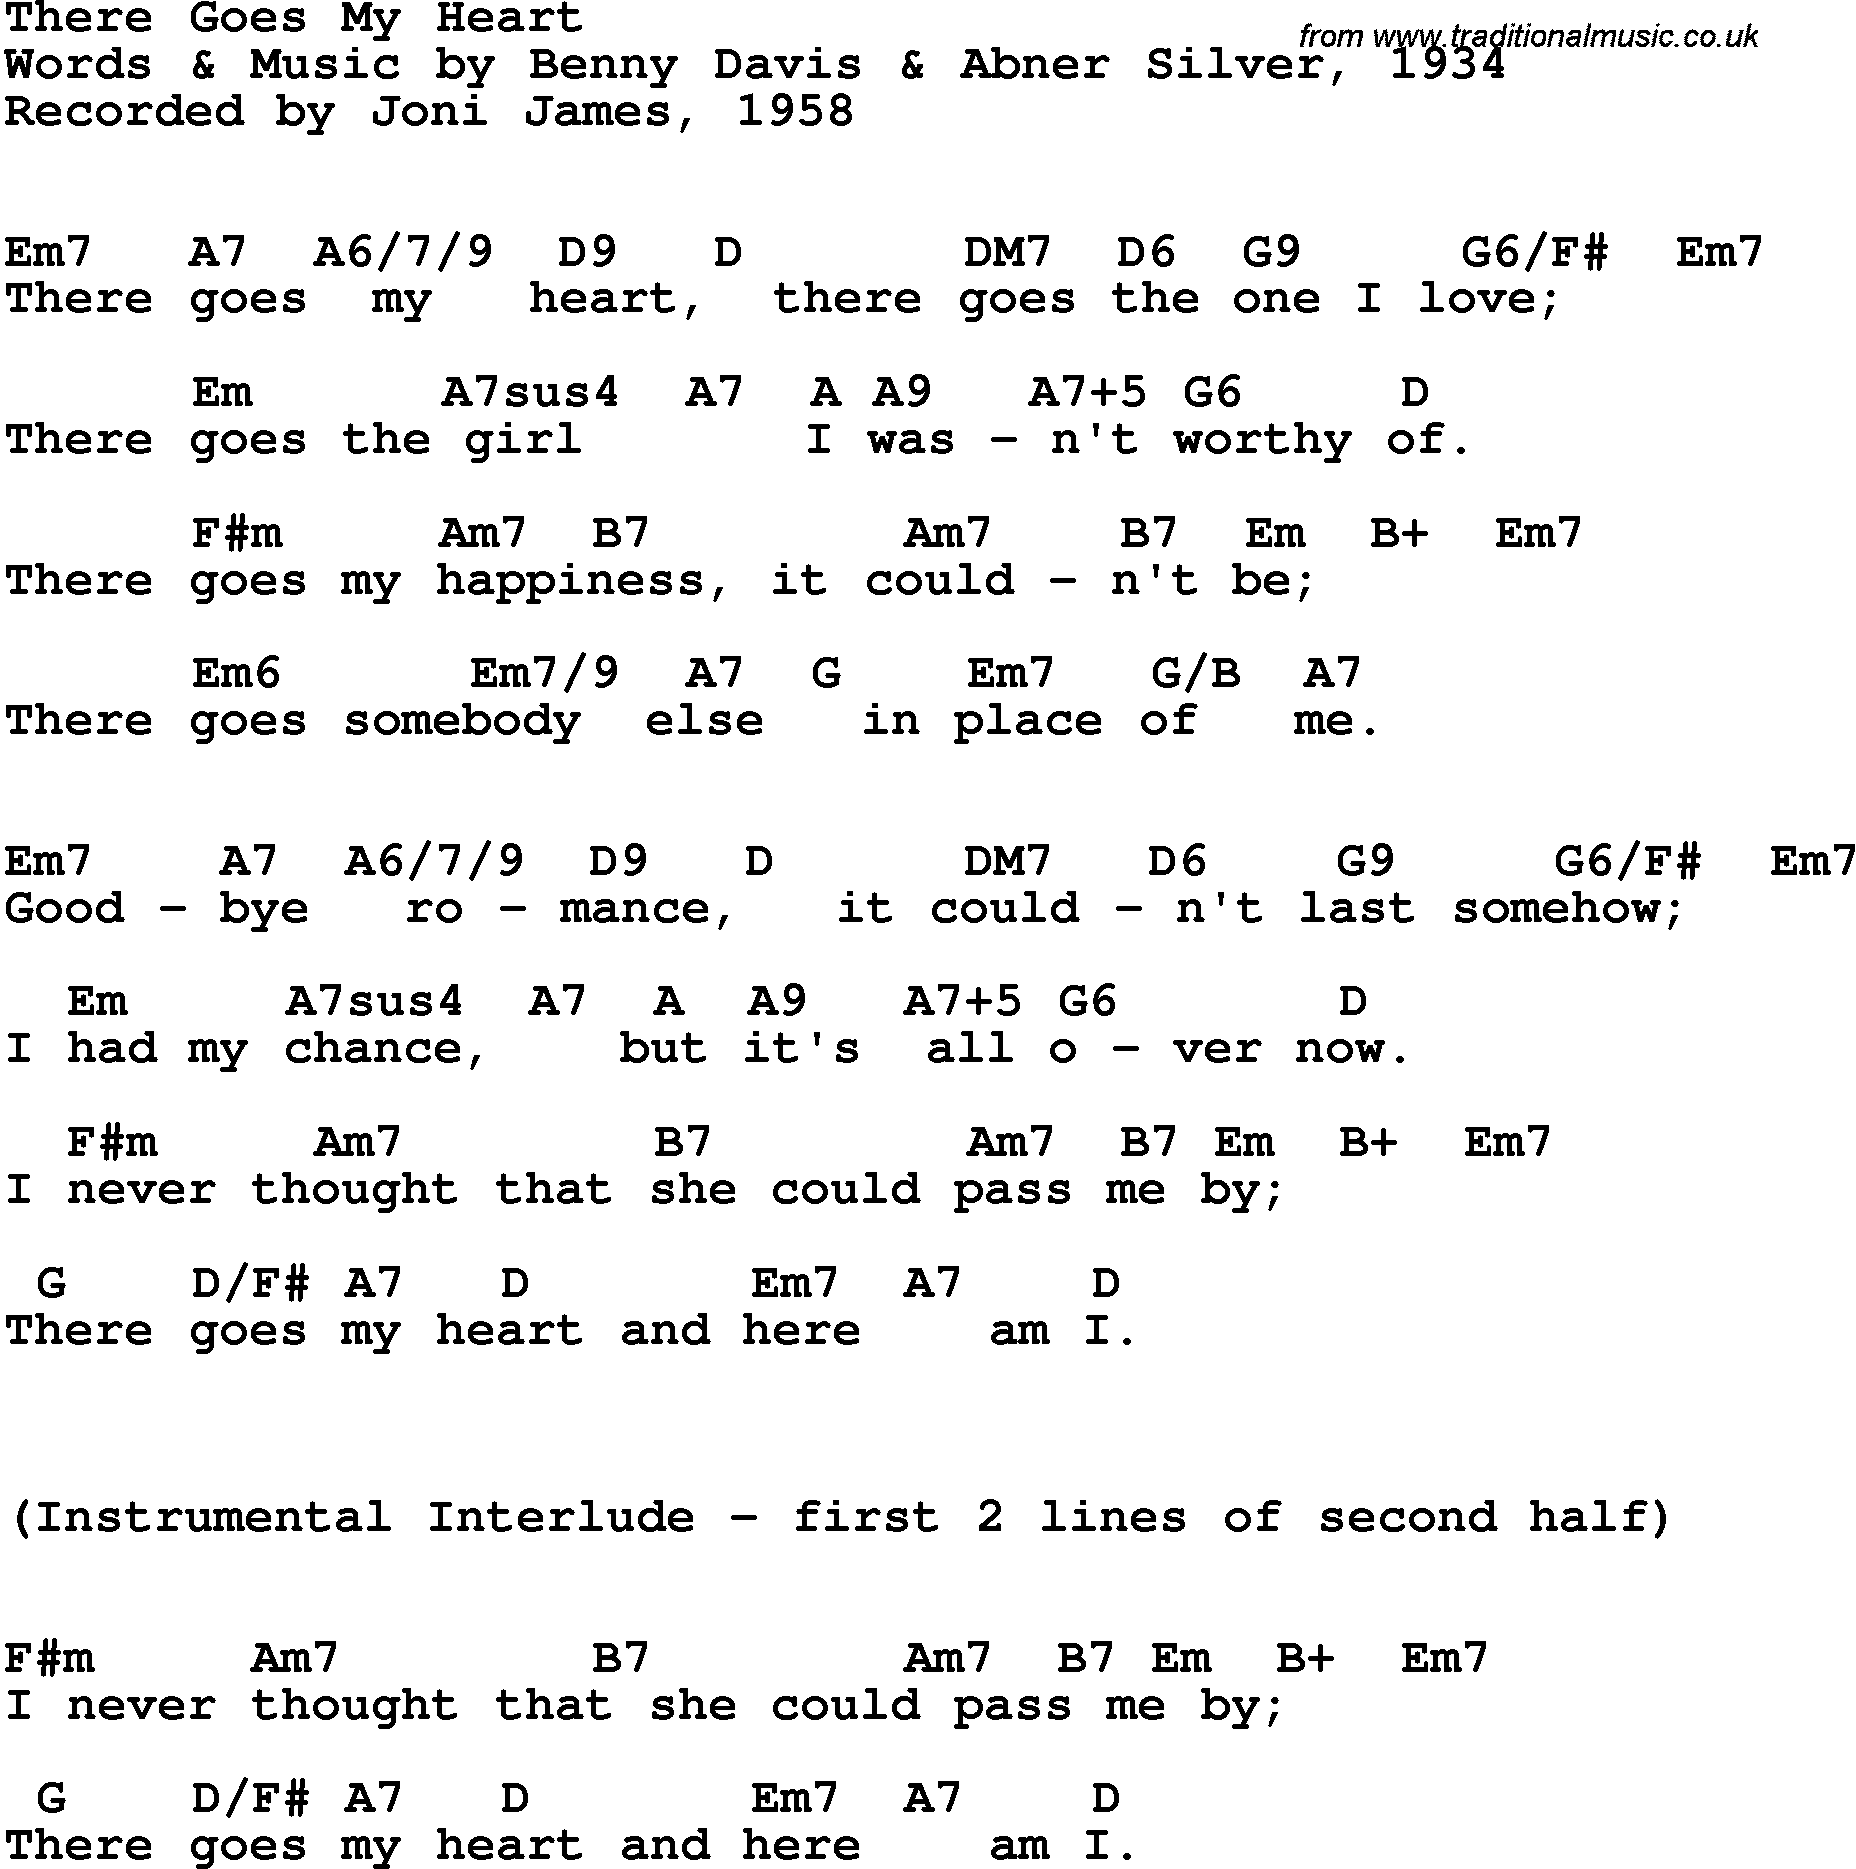 Song Lyrics with guitar chords for There Goes My Heart - Joni James, 1958